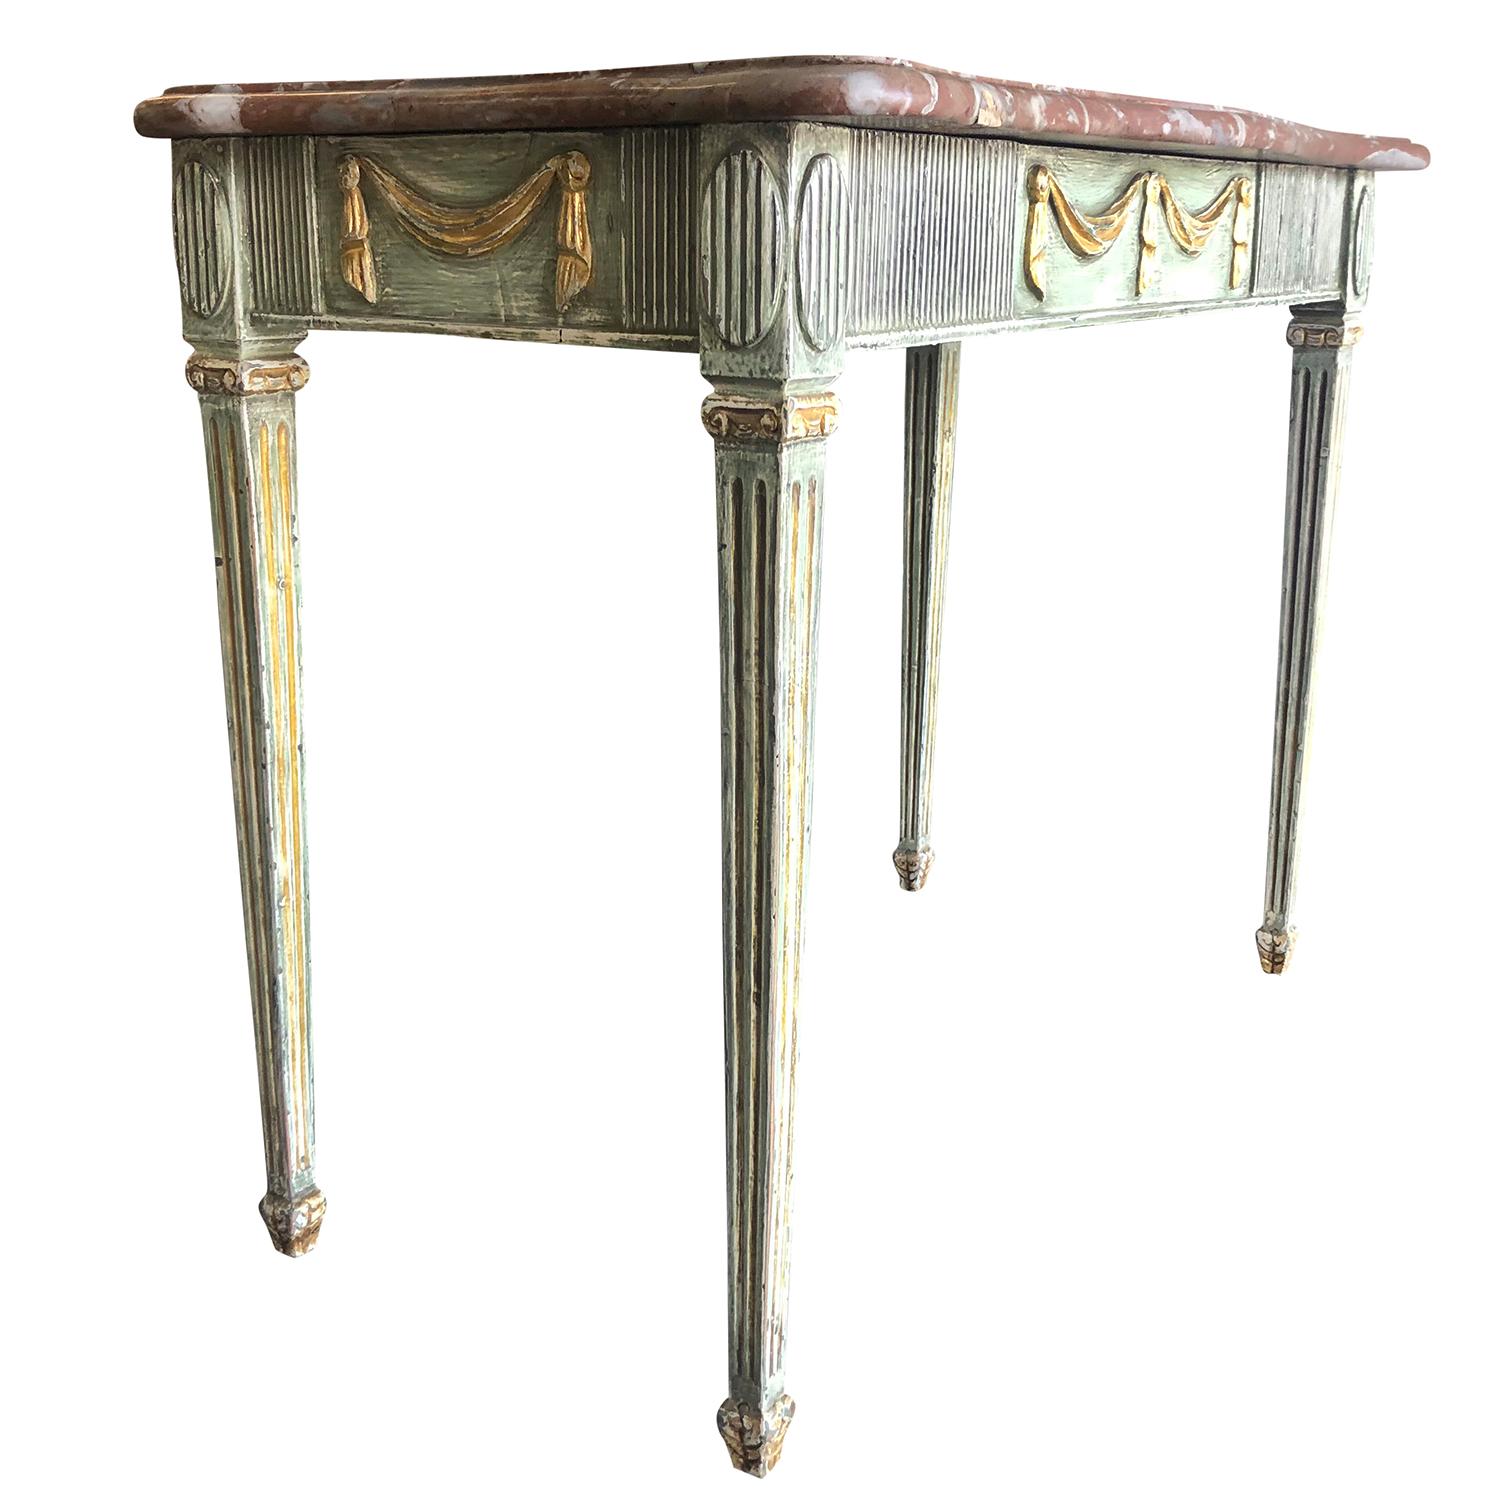 Hand-Carved 18th Century Green Swedish Gustavian Console Table, Freestanding Giltwood Table